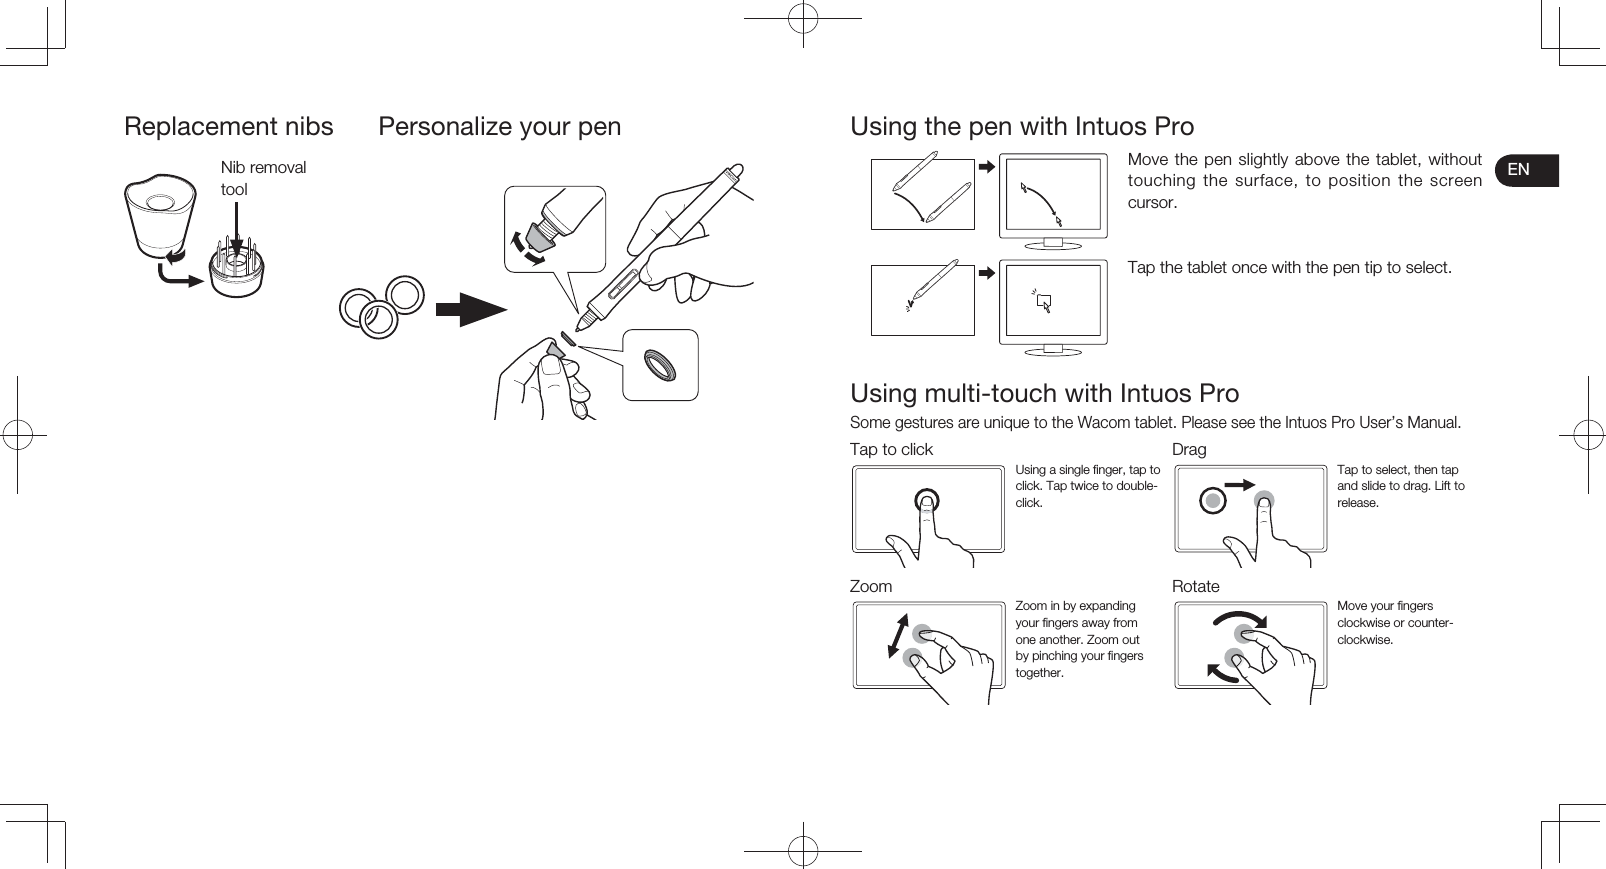 ENReplacement nibs  Personalize your penNib removal toolUsing the pen with Intuos ProMove the pen slightly above the tablet, without touching the surface, to position the screen cursor.Tap the tablet once with the pen tip to select.Using multi-touch with Intuos ProSome gestures are unique to the Wacom tablet. Please see the Intuos Pro User’s Manual.Tap to click DragUsing a single finger, tap to click. Tap twice to double-click.Tap to select, then tap and slide to drag. Lift to release.Zoom RotateZoom in by expanding your fingers away from one another. Zoom out by pinching your fingers together.Move your fingers clockwise or counter-clockwise.